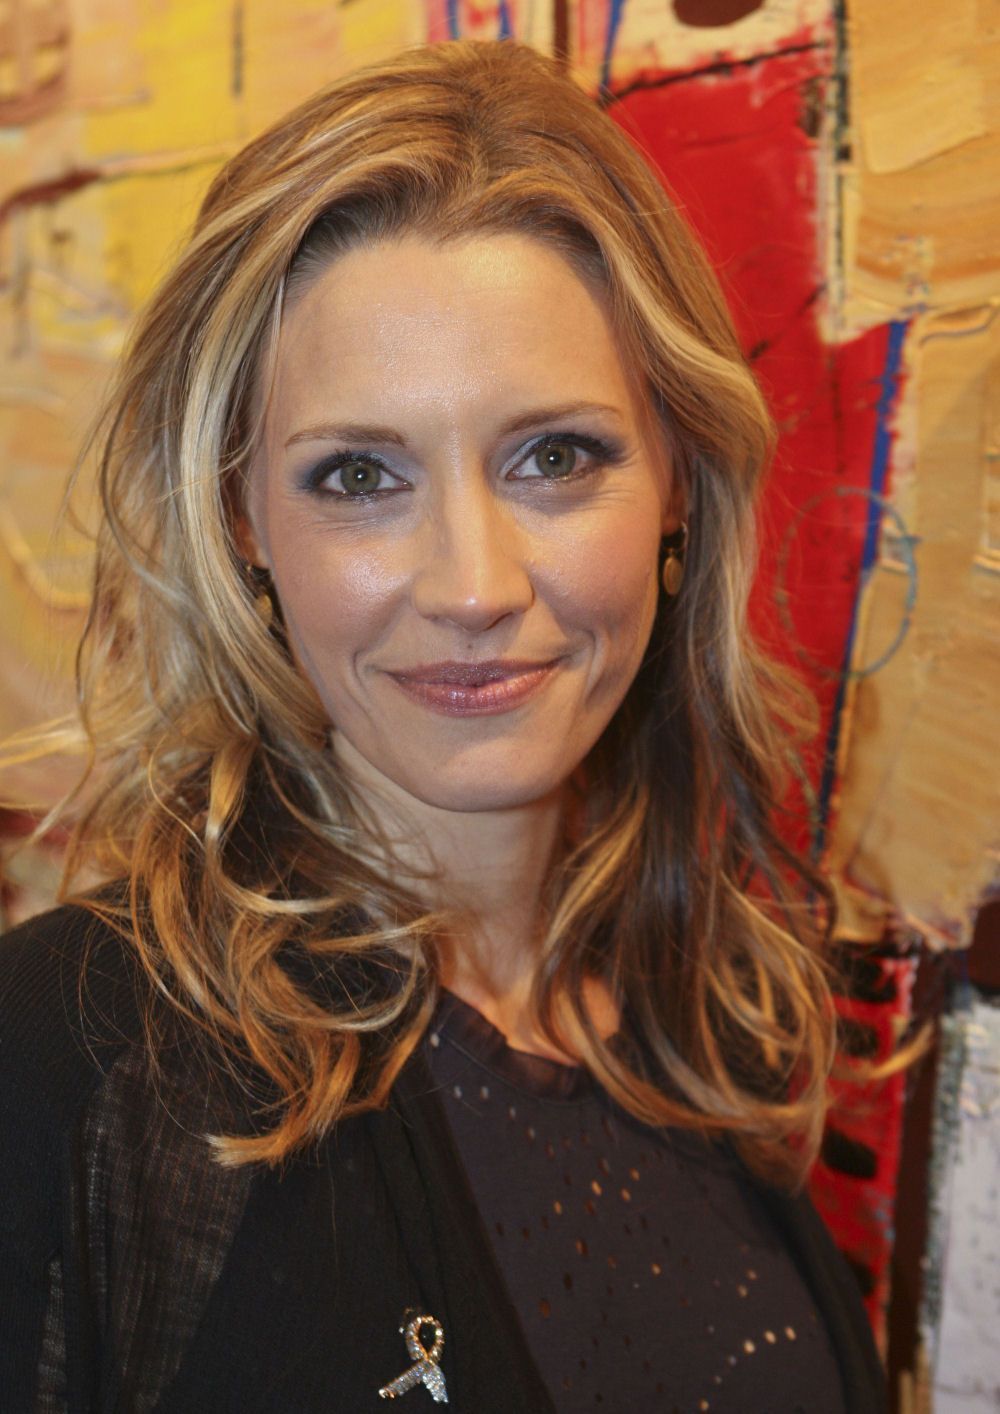 How Much is KaDee Strickland’s Net Worth as of 2023?